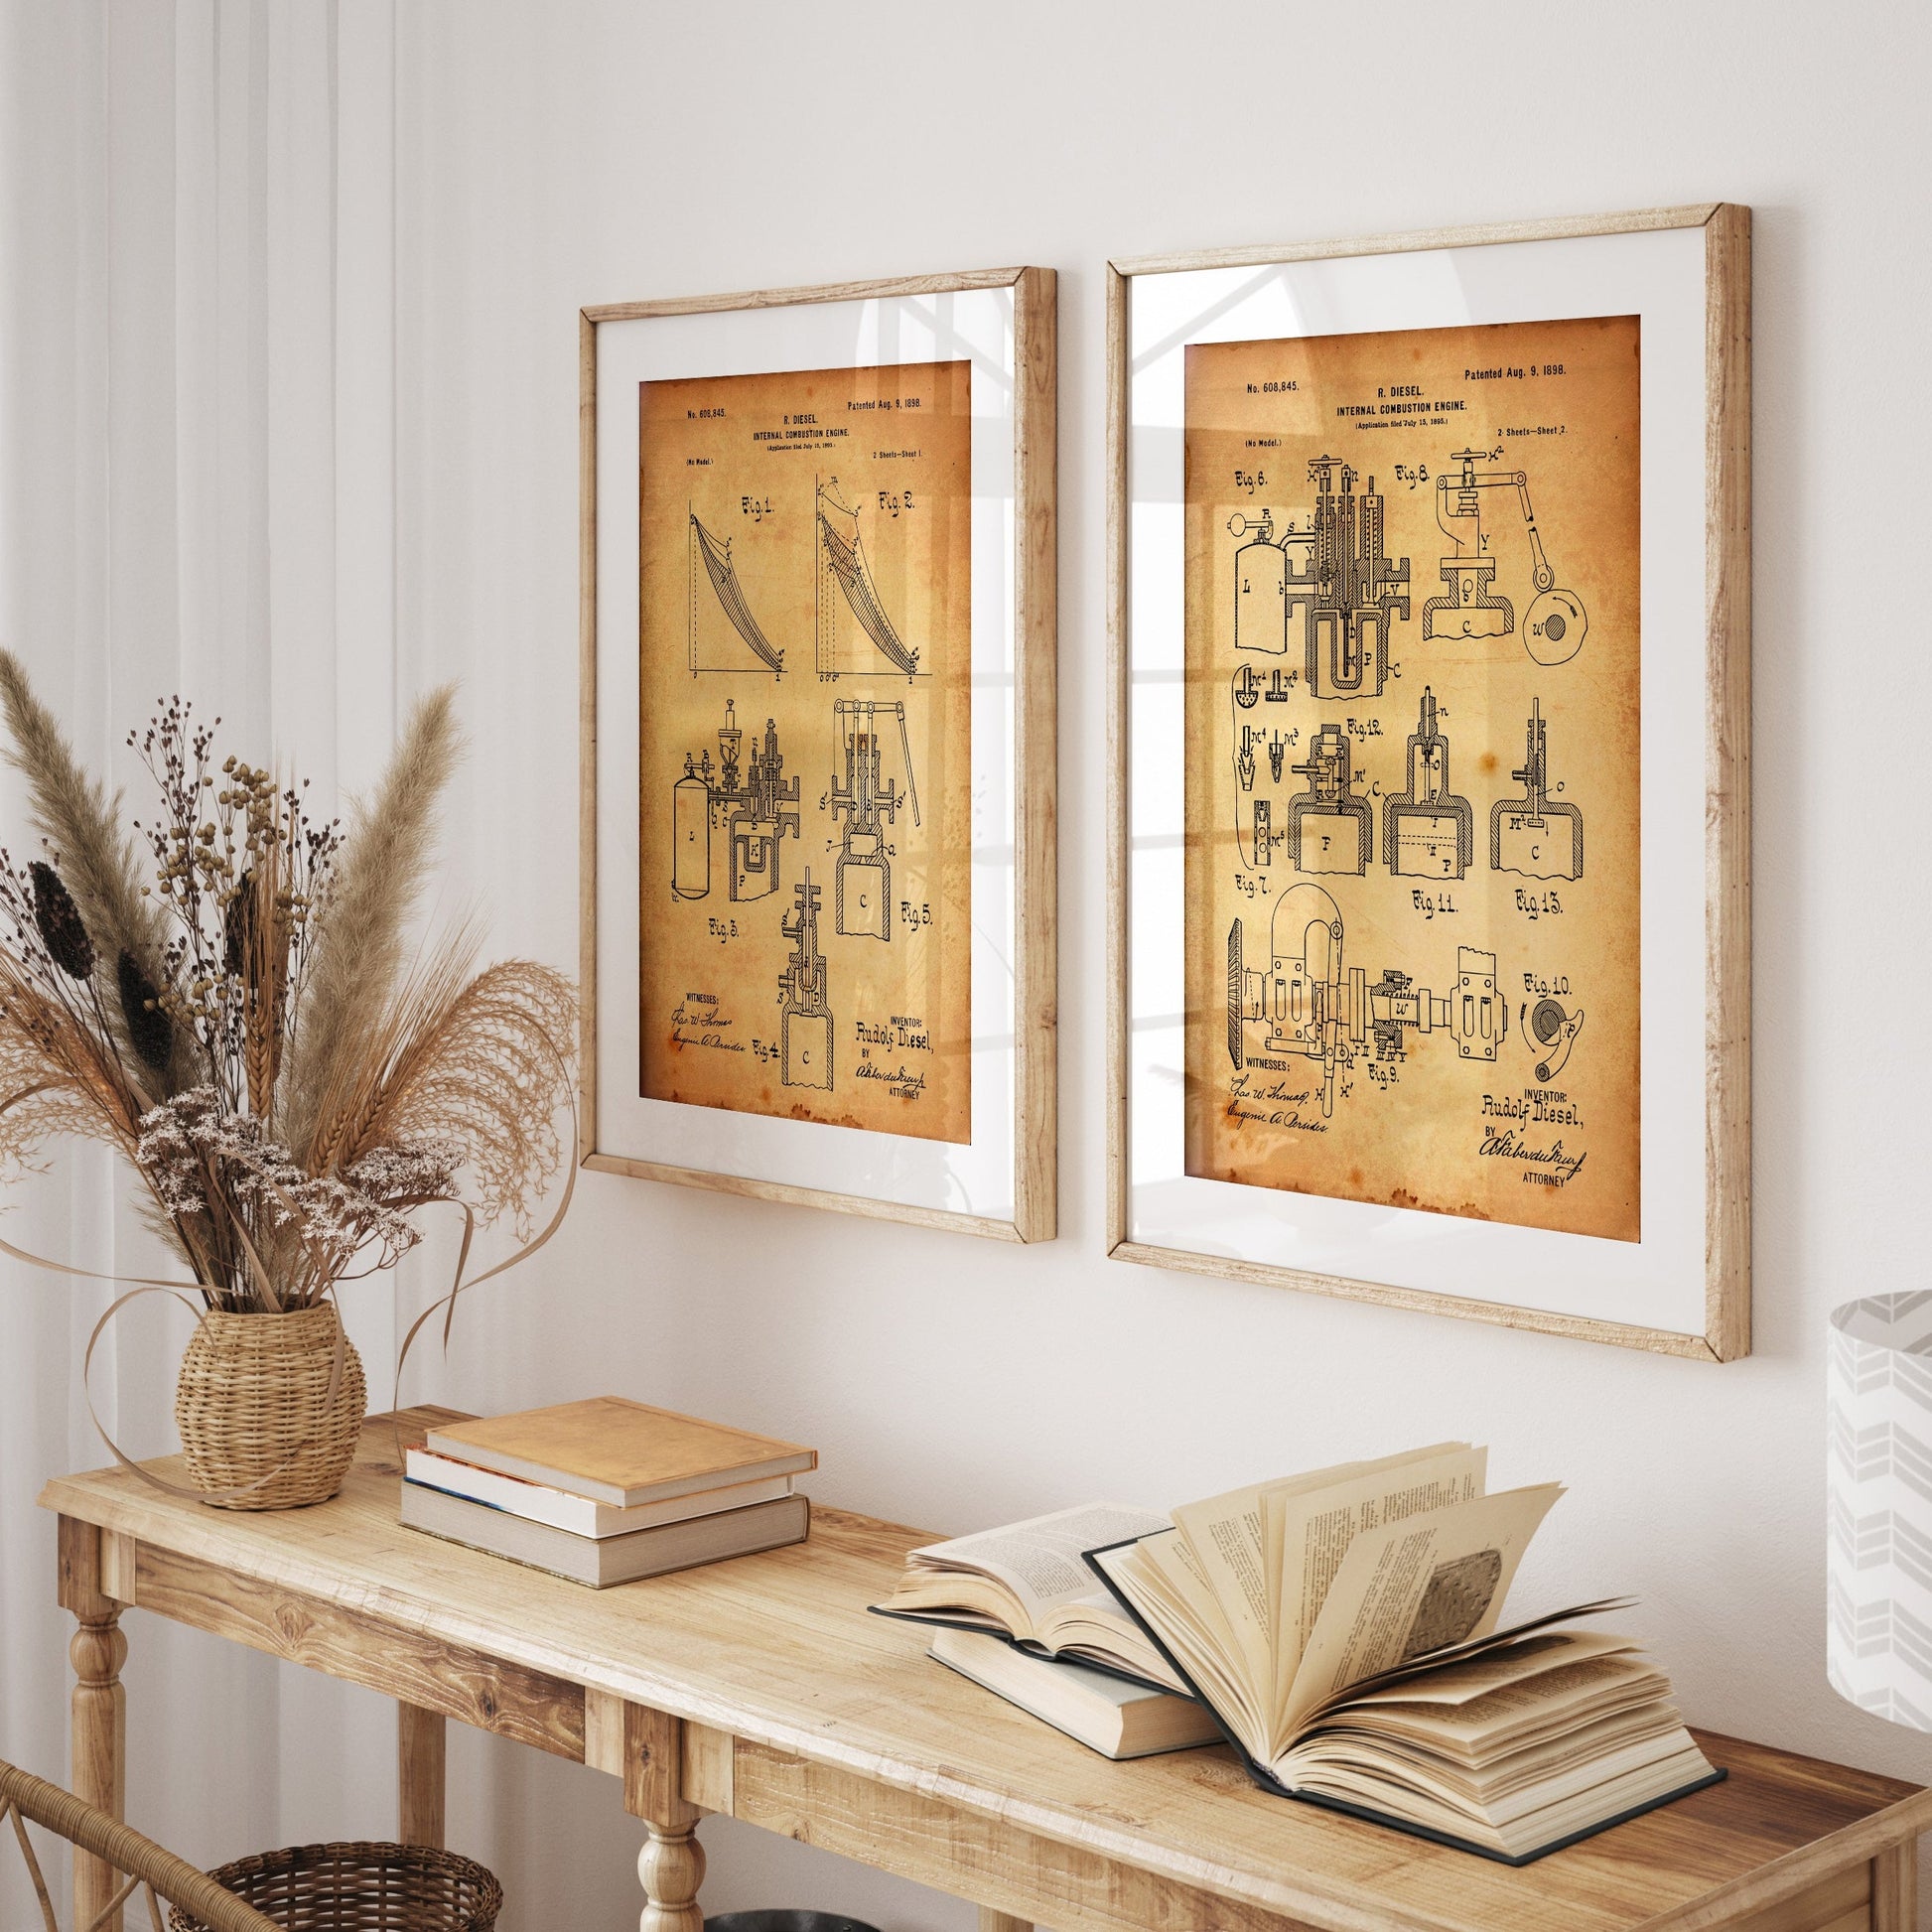 Diesel Combustion Engine Set Of 2 Patent Prints - Magic Posters